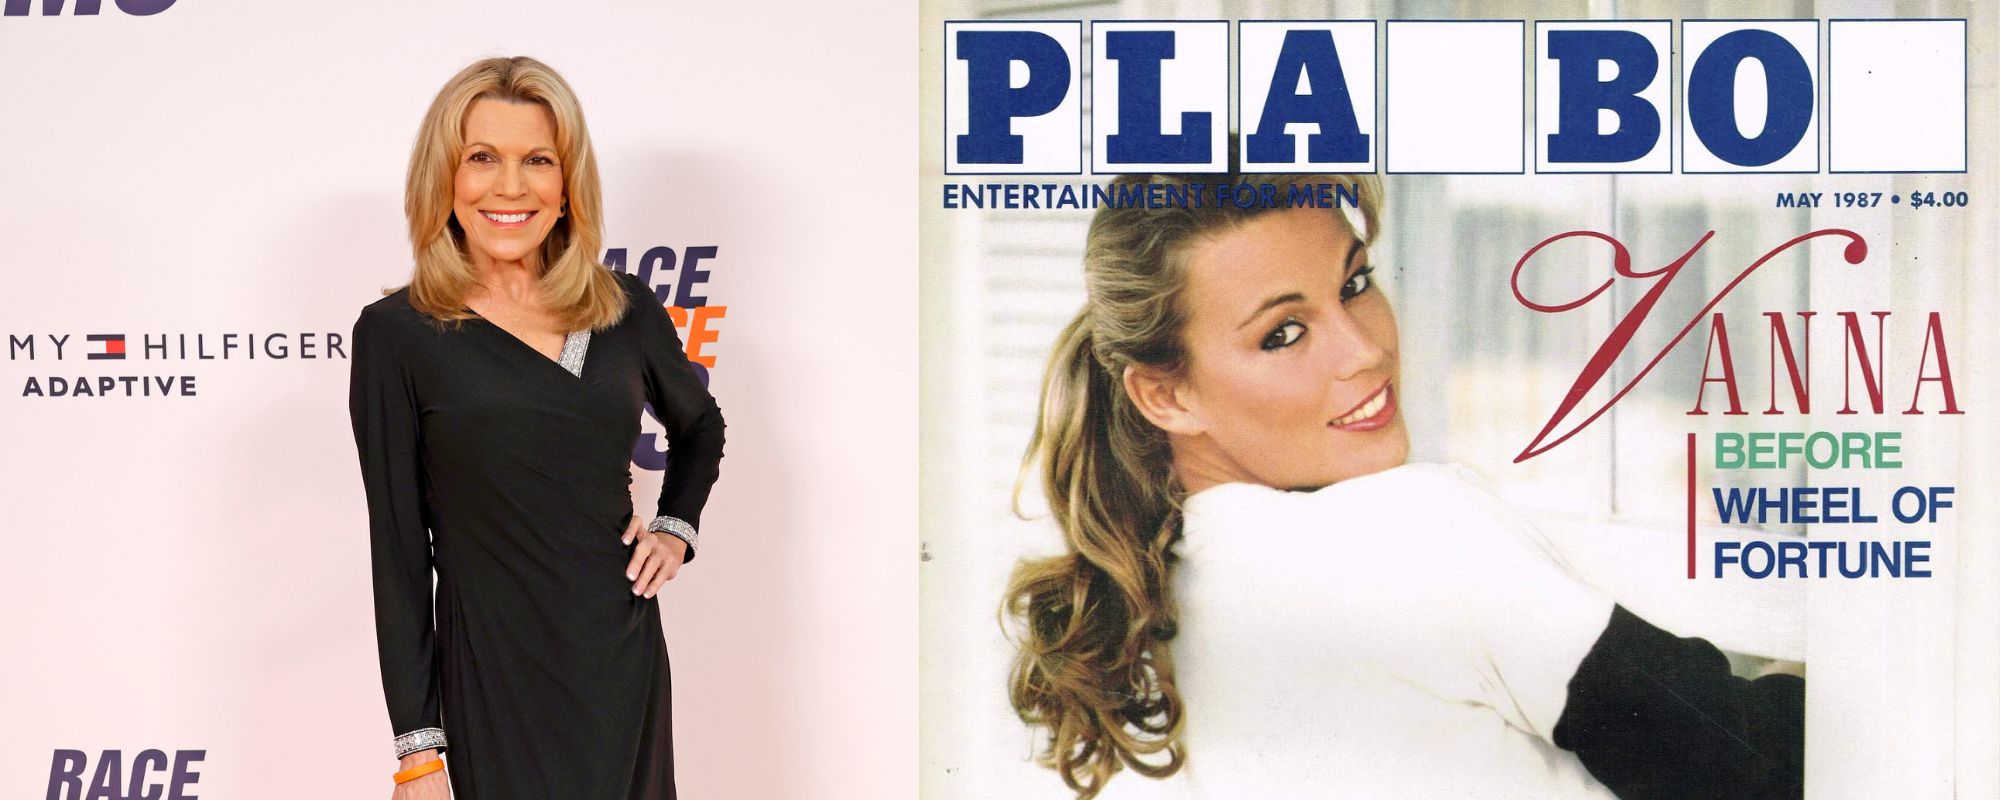 Best of Vanna white and playboy